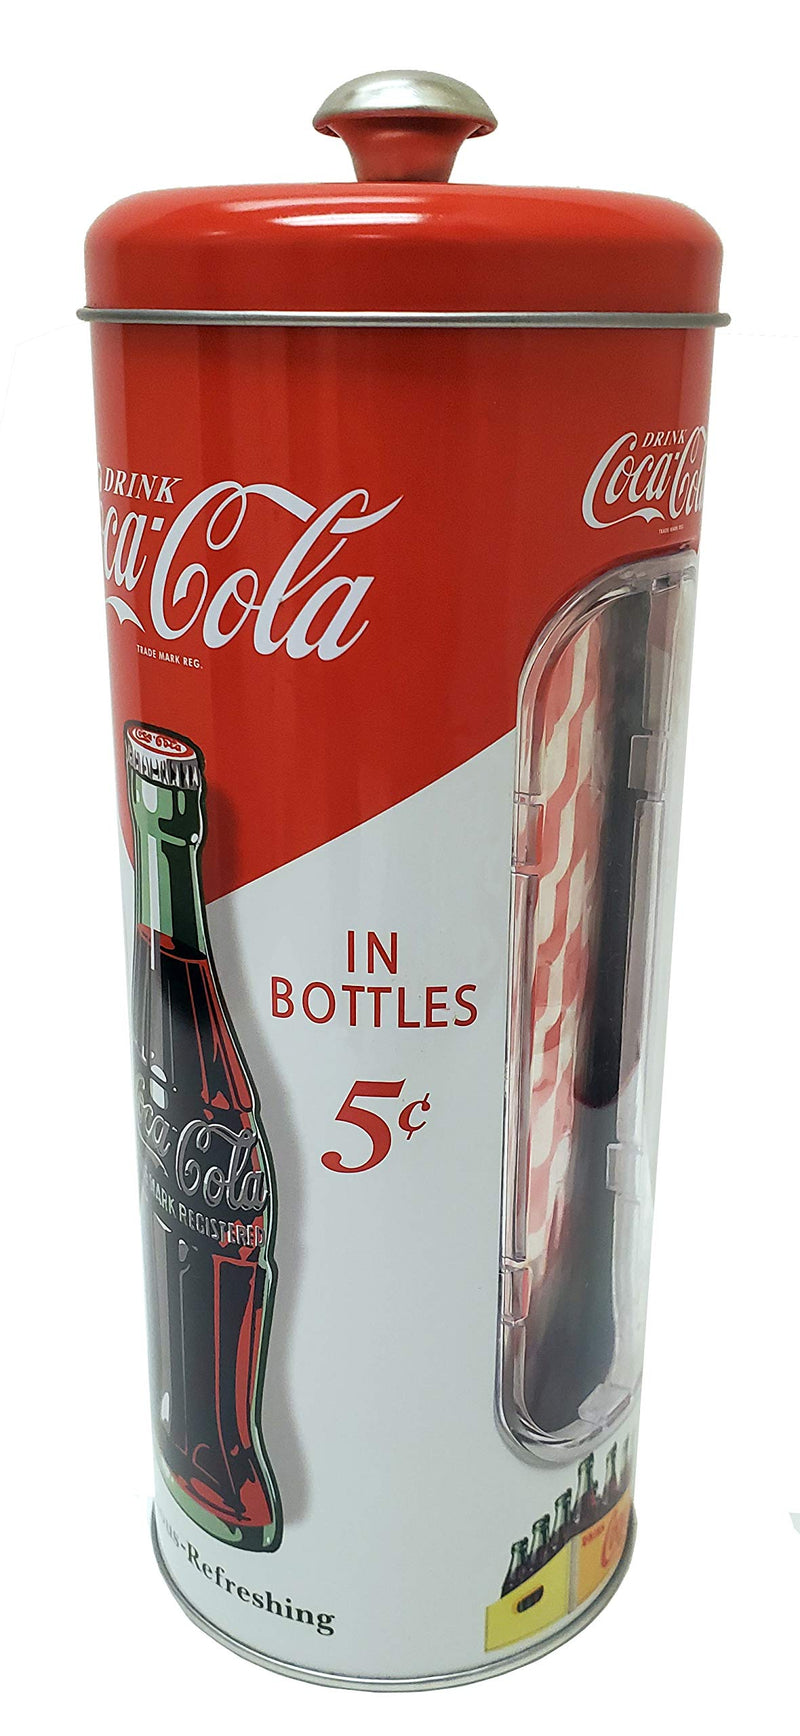  [AUSTRALIA] - The Tin Box Company Coke Holder Tin with 20 Paper Straws Inside, 3-3/8 x 8-1/4"H, Red and White